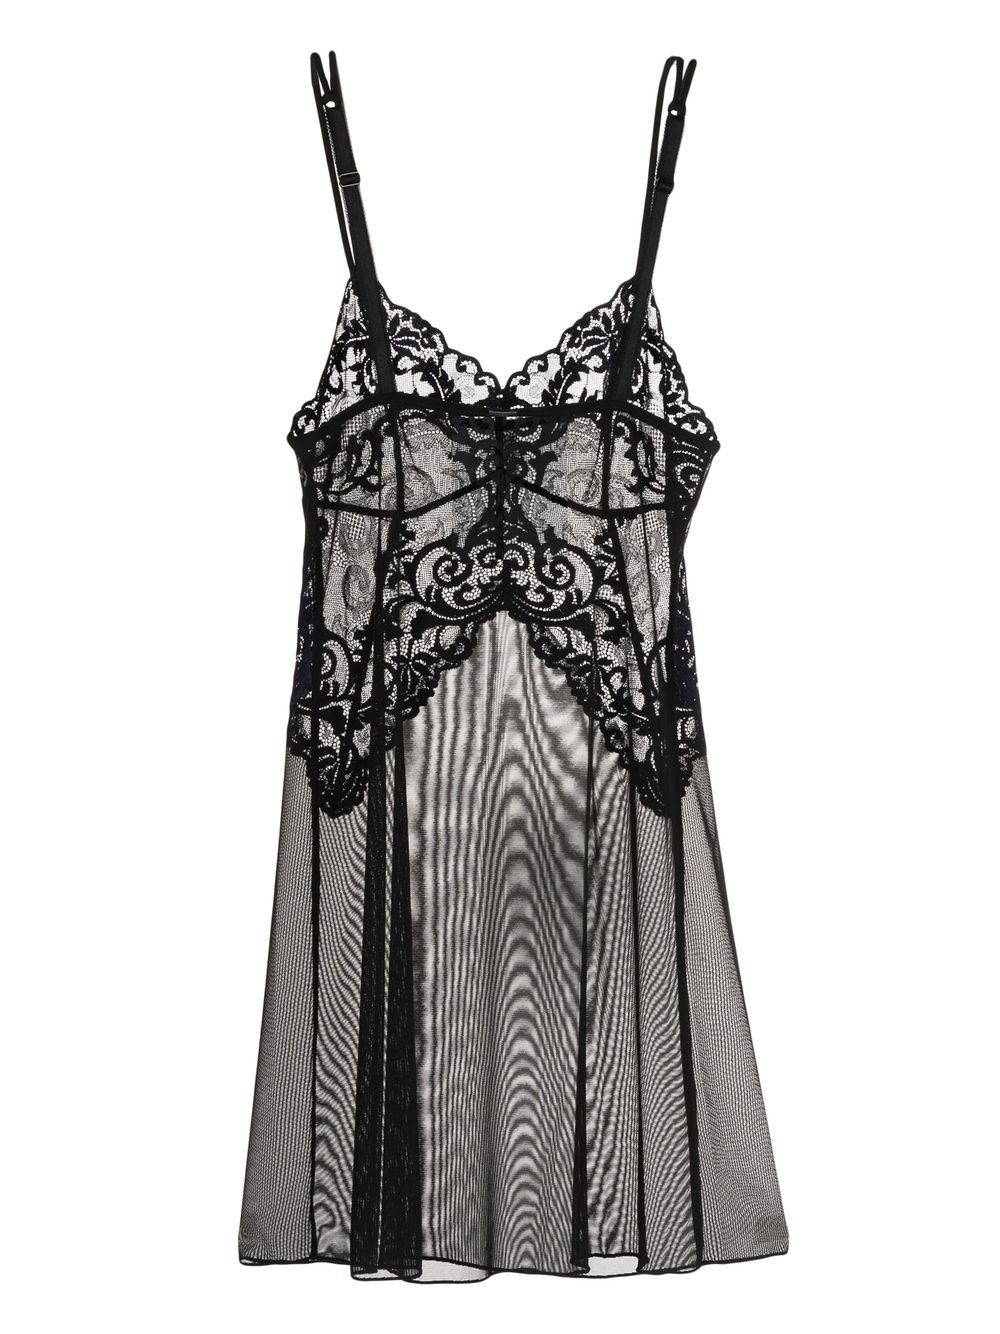 Wacoal Instant Icon Lace Chemise - Farfetch